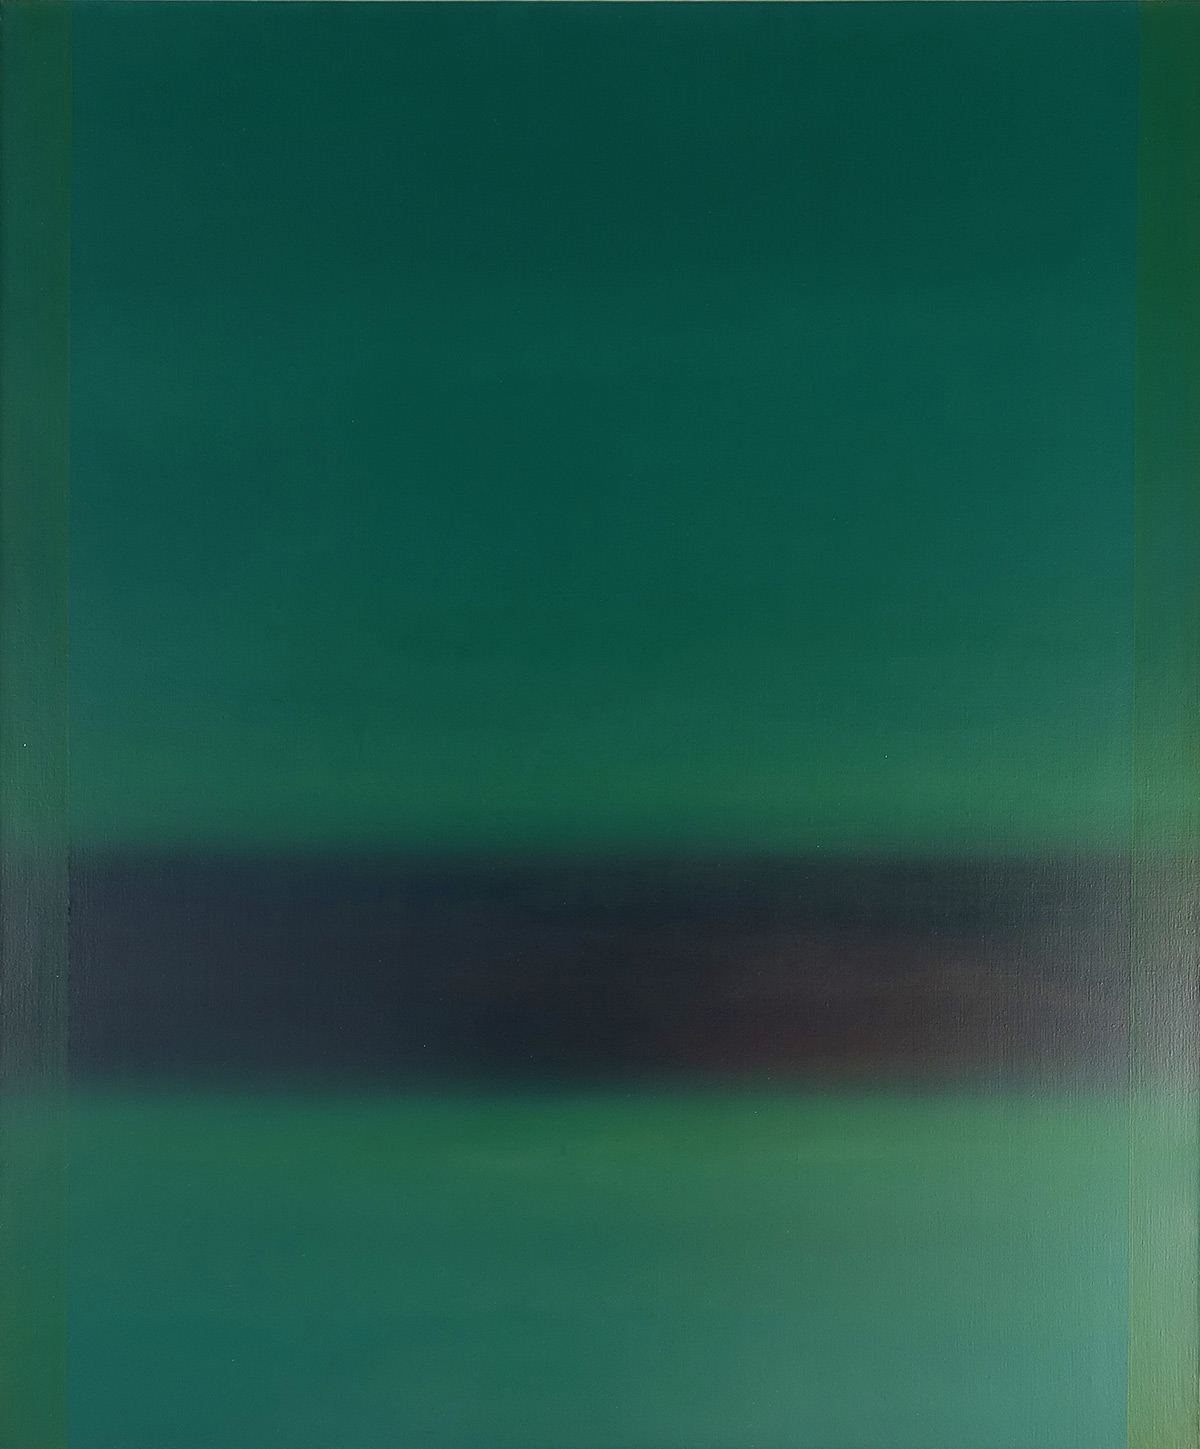 Anna Podlewska - Green with an element of black (Oil on Canvas | Size: 106 x 126 cm | Price: 7000 PLN)